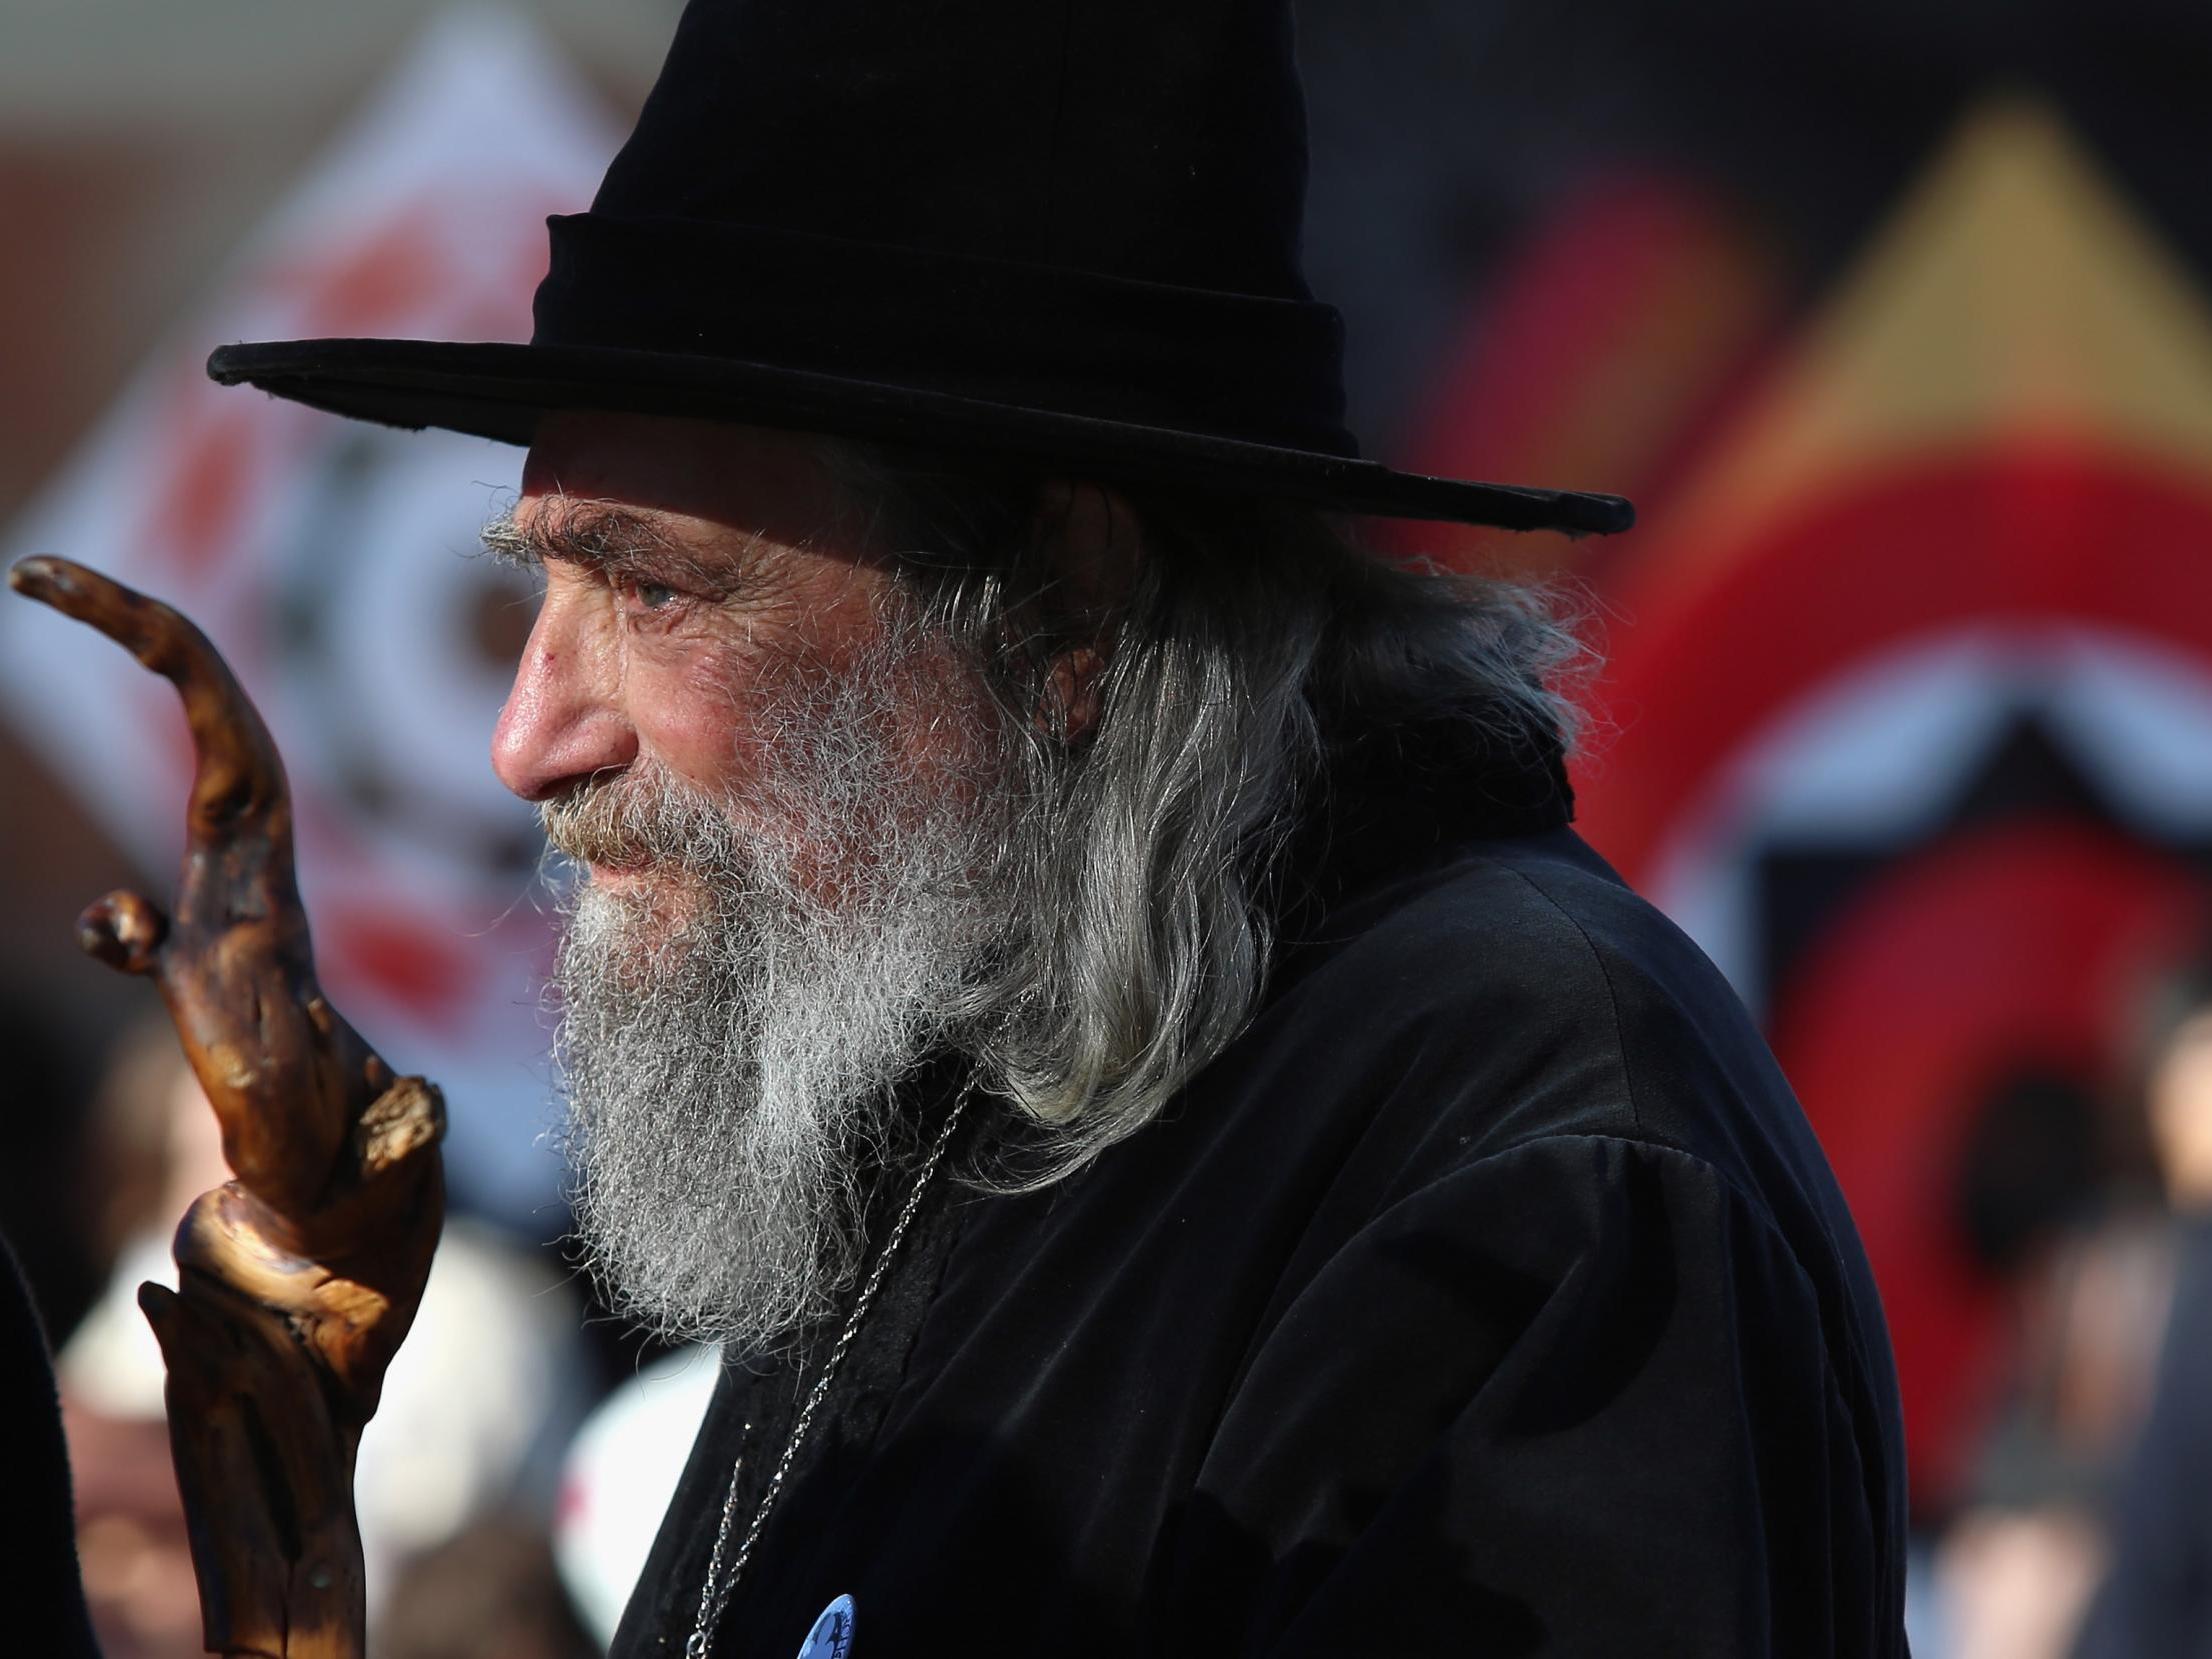 Ian Channell, known as The Wizard, has been a fixture in Christchurch's Cathedral Square for decades's